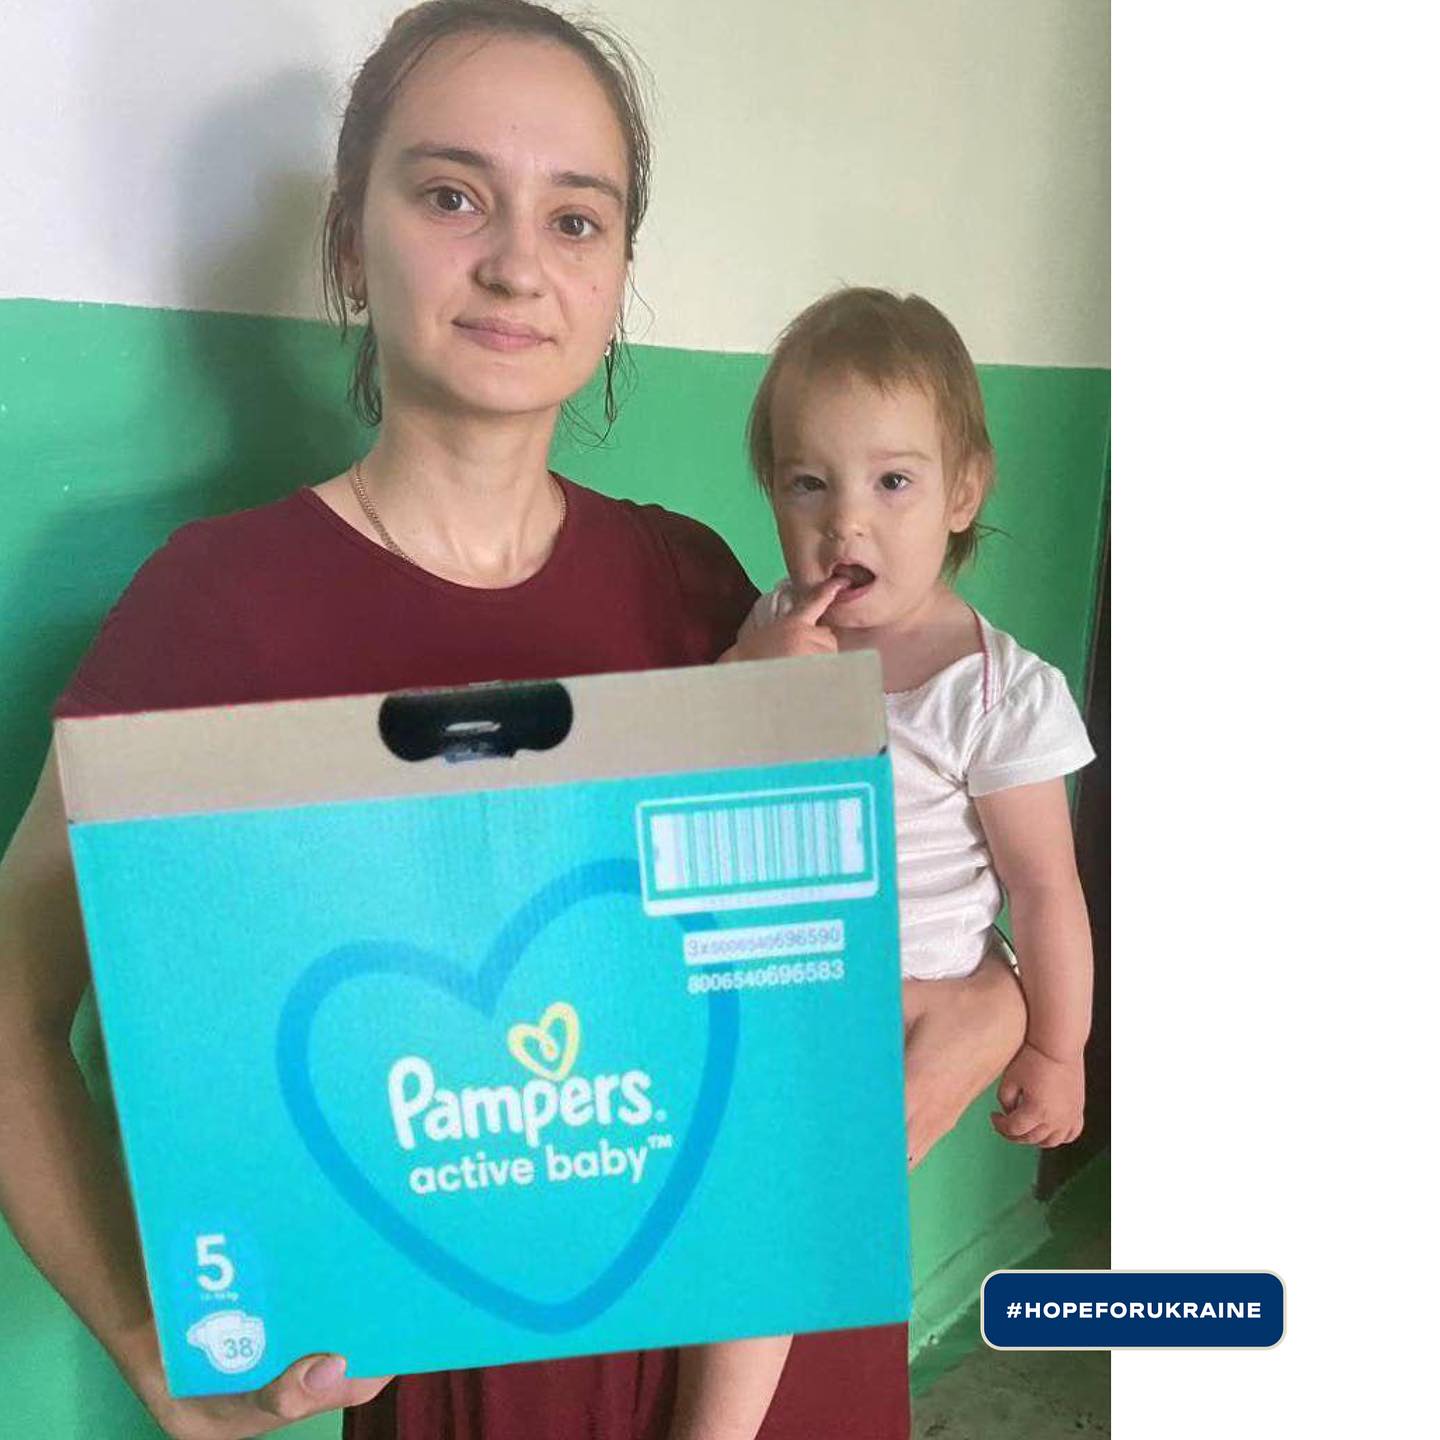 a woman with a baby holding a box of pampers diapers.